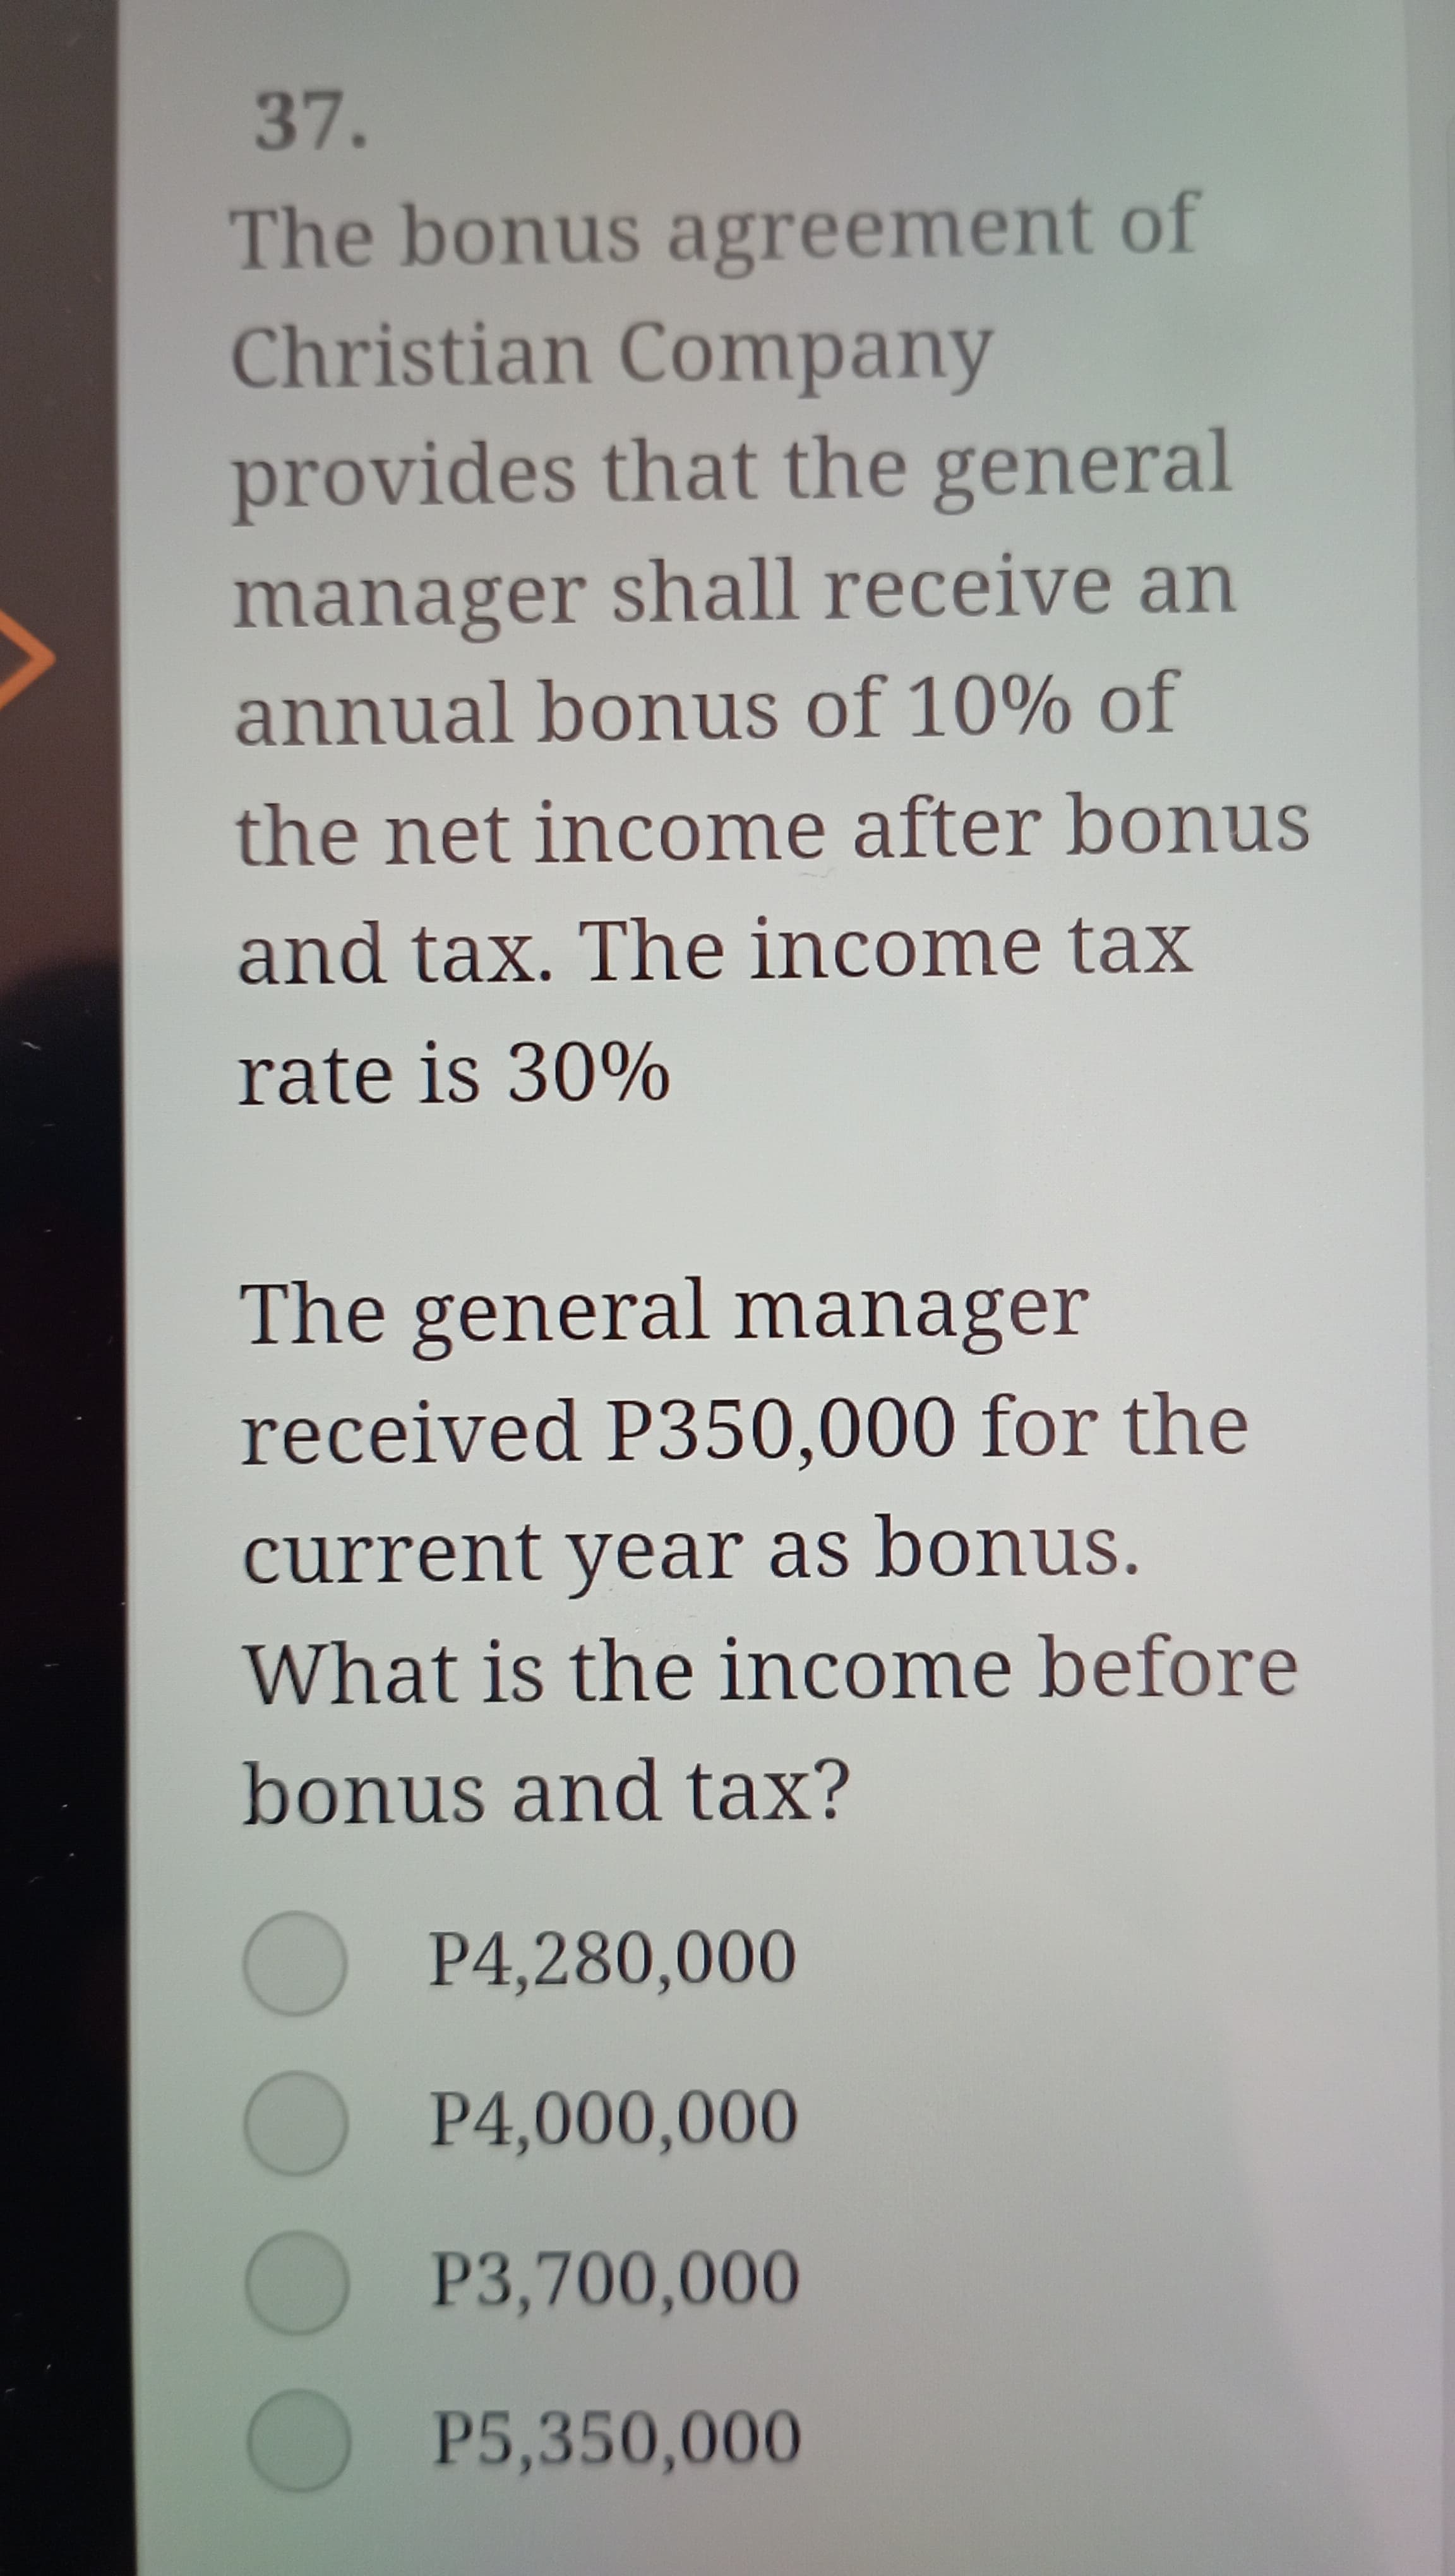 37.
The bonus agreement of
Christian Company
provides that the general
manager shall receive an
annual bonus of 10% of
the net income after bonus
and tax. The income tax
rate is 30%
The general manager
received P350,000 for the
current year as bonus.
What is the income before
bonus and tax?
P4,280,000
P4,000,000
P3,700,000
P5,350,000
